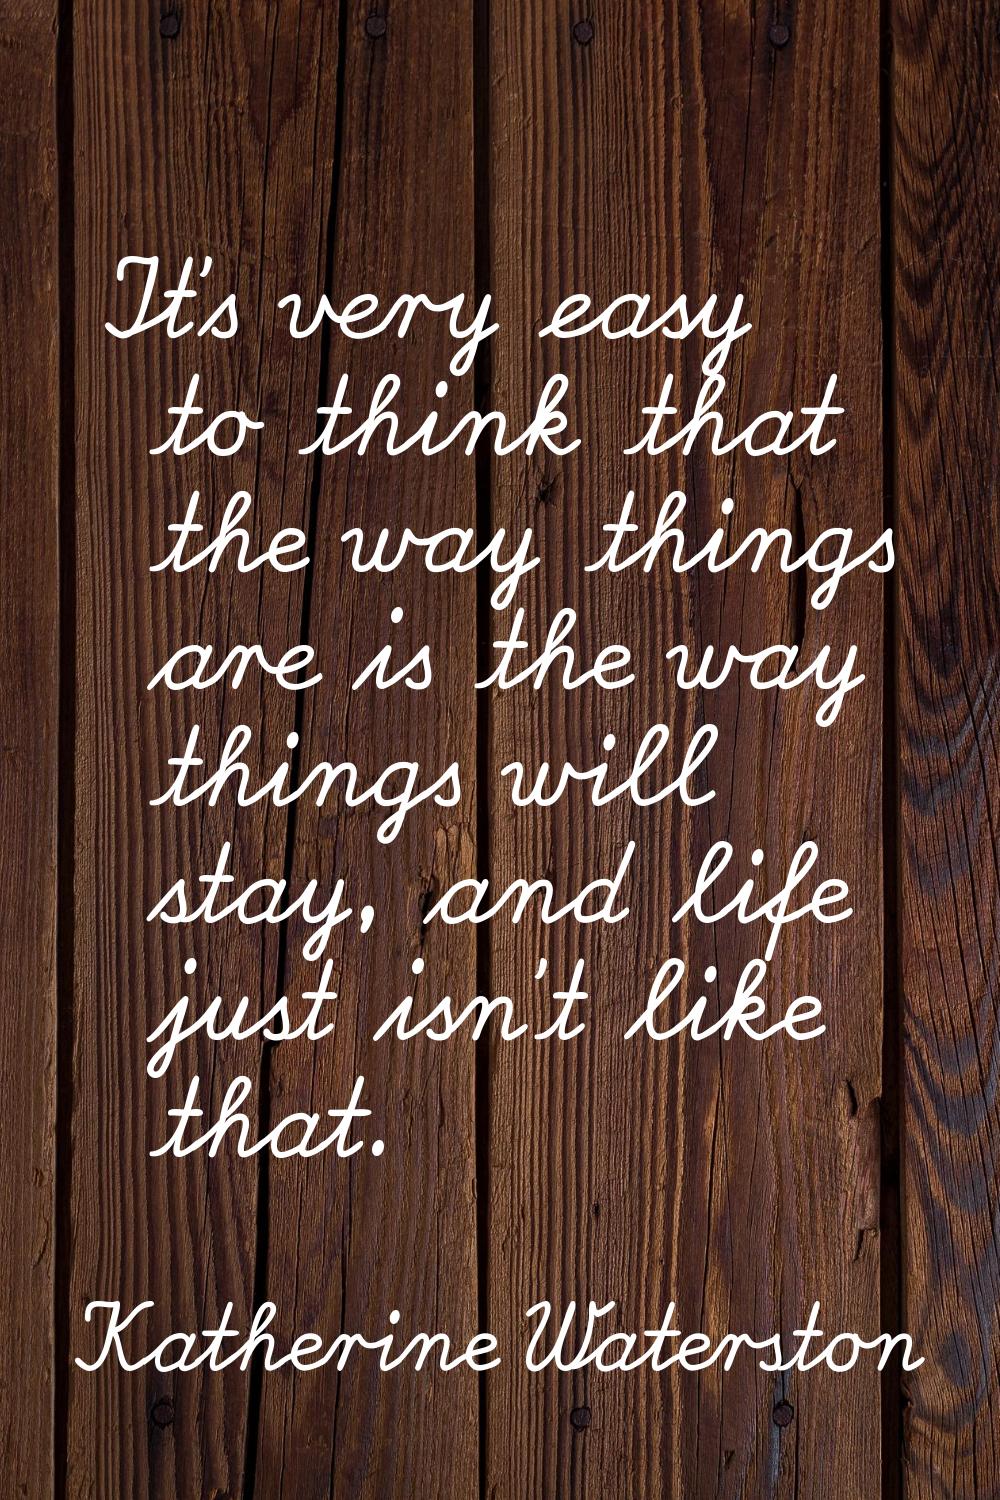 It's very easy to think that the way things are is the way things will stay, and life just isn't li